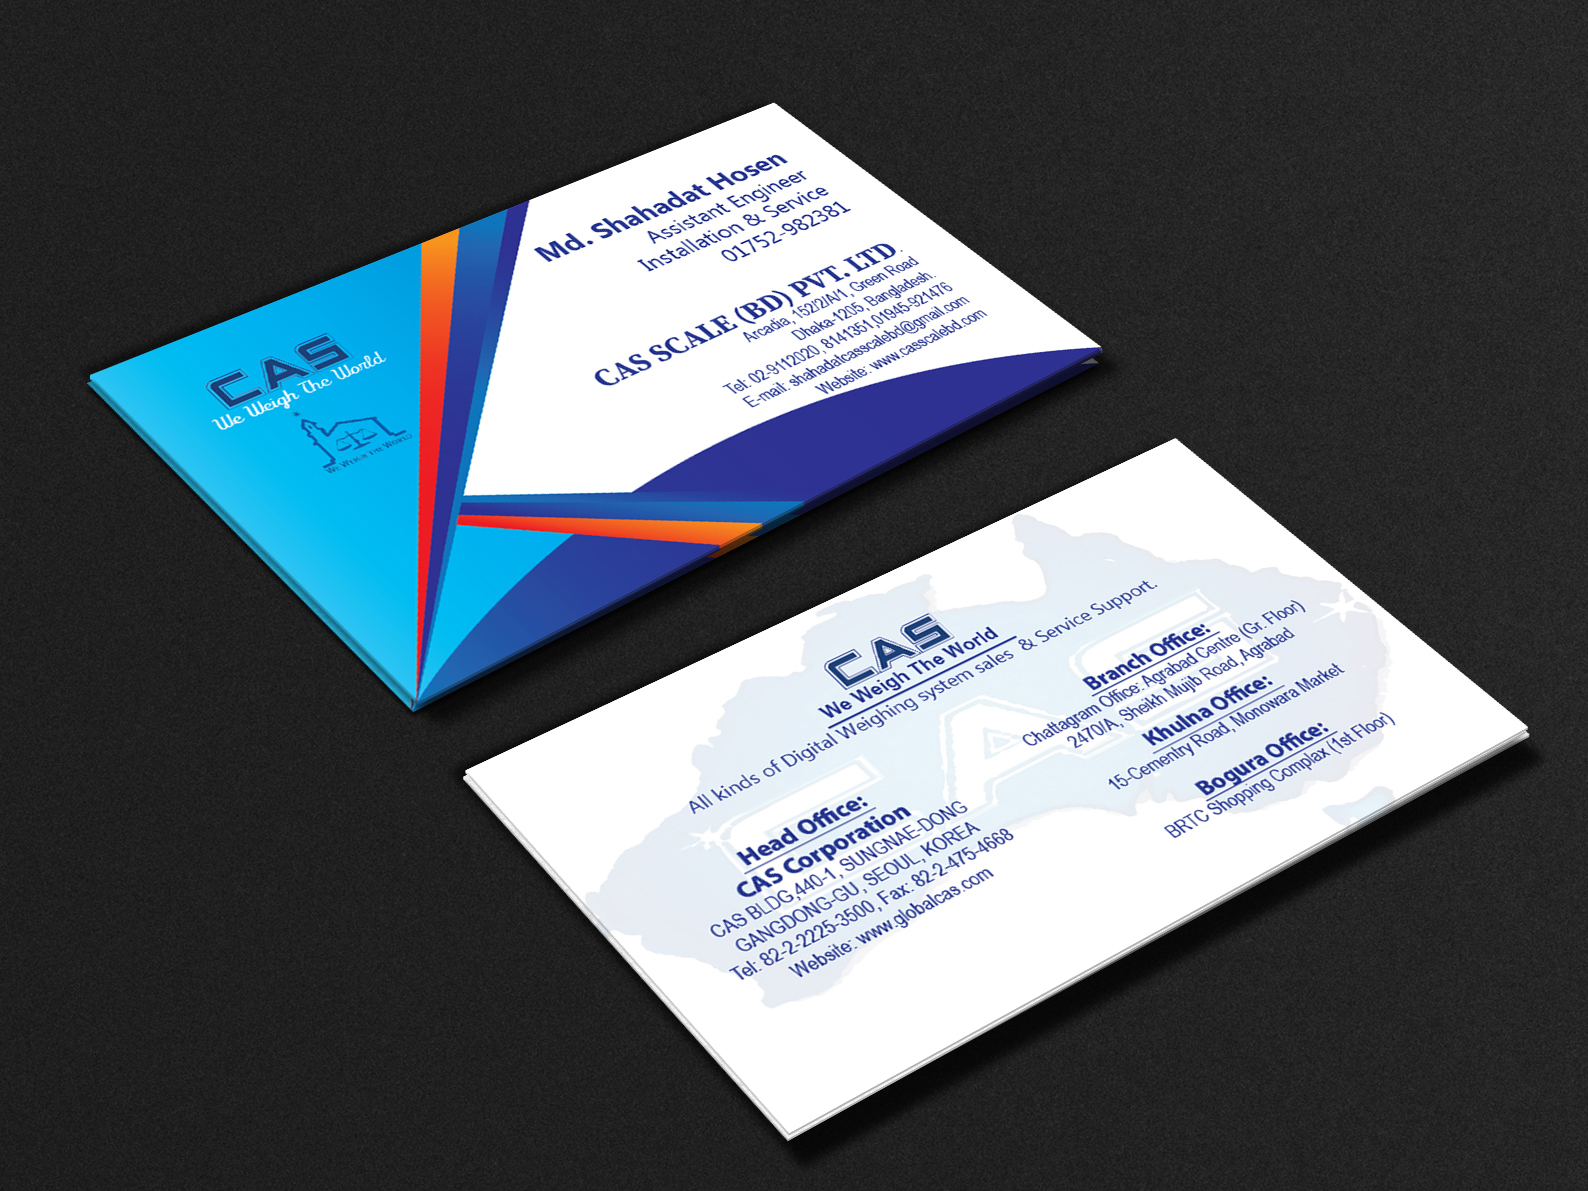 5438I will design professional brochure and flyer in 24 hours